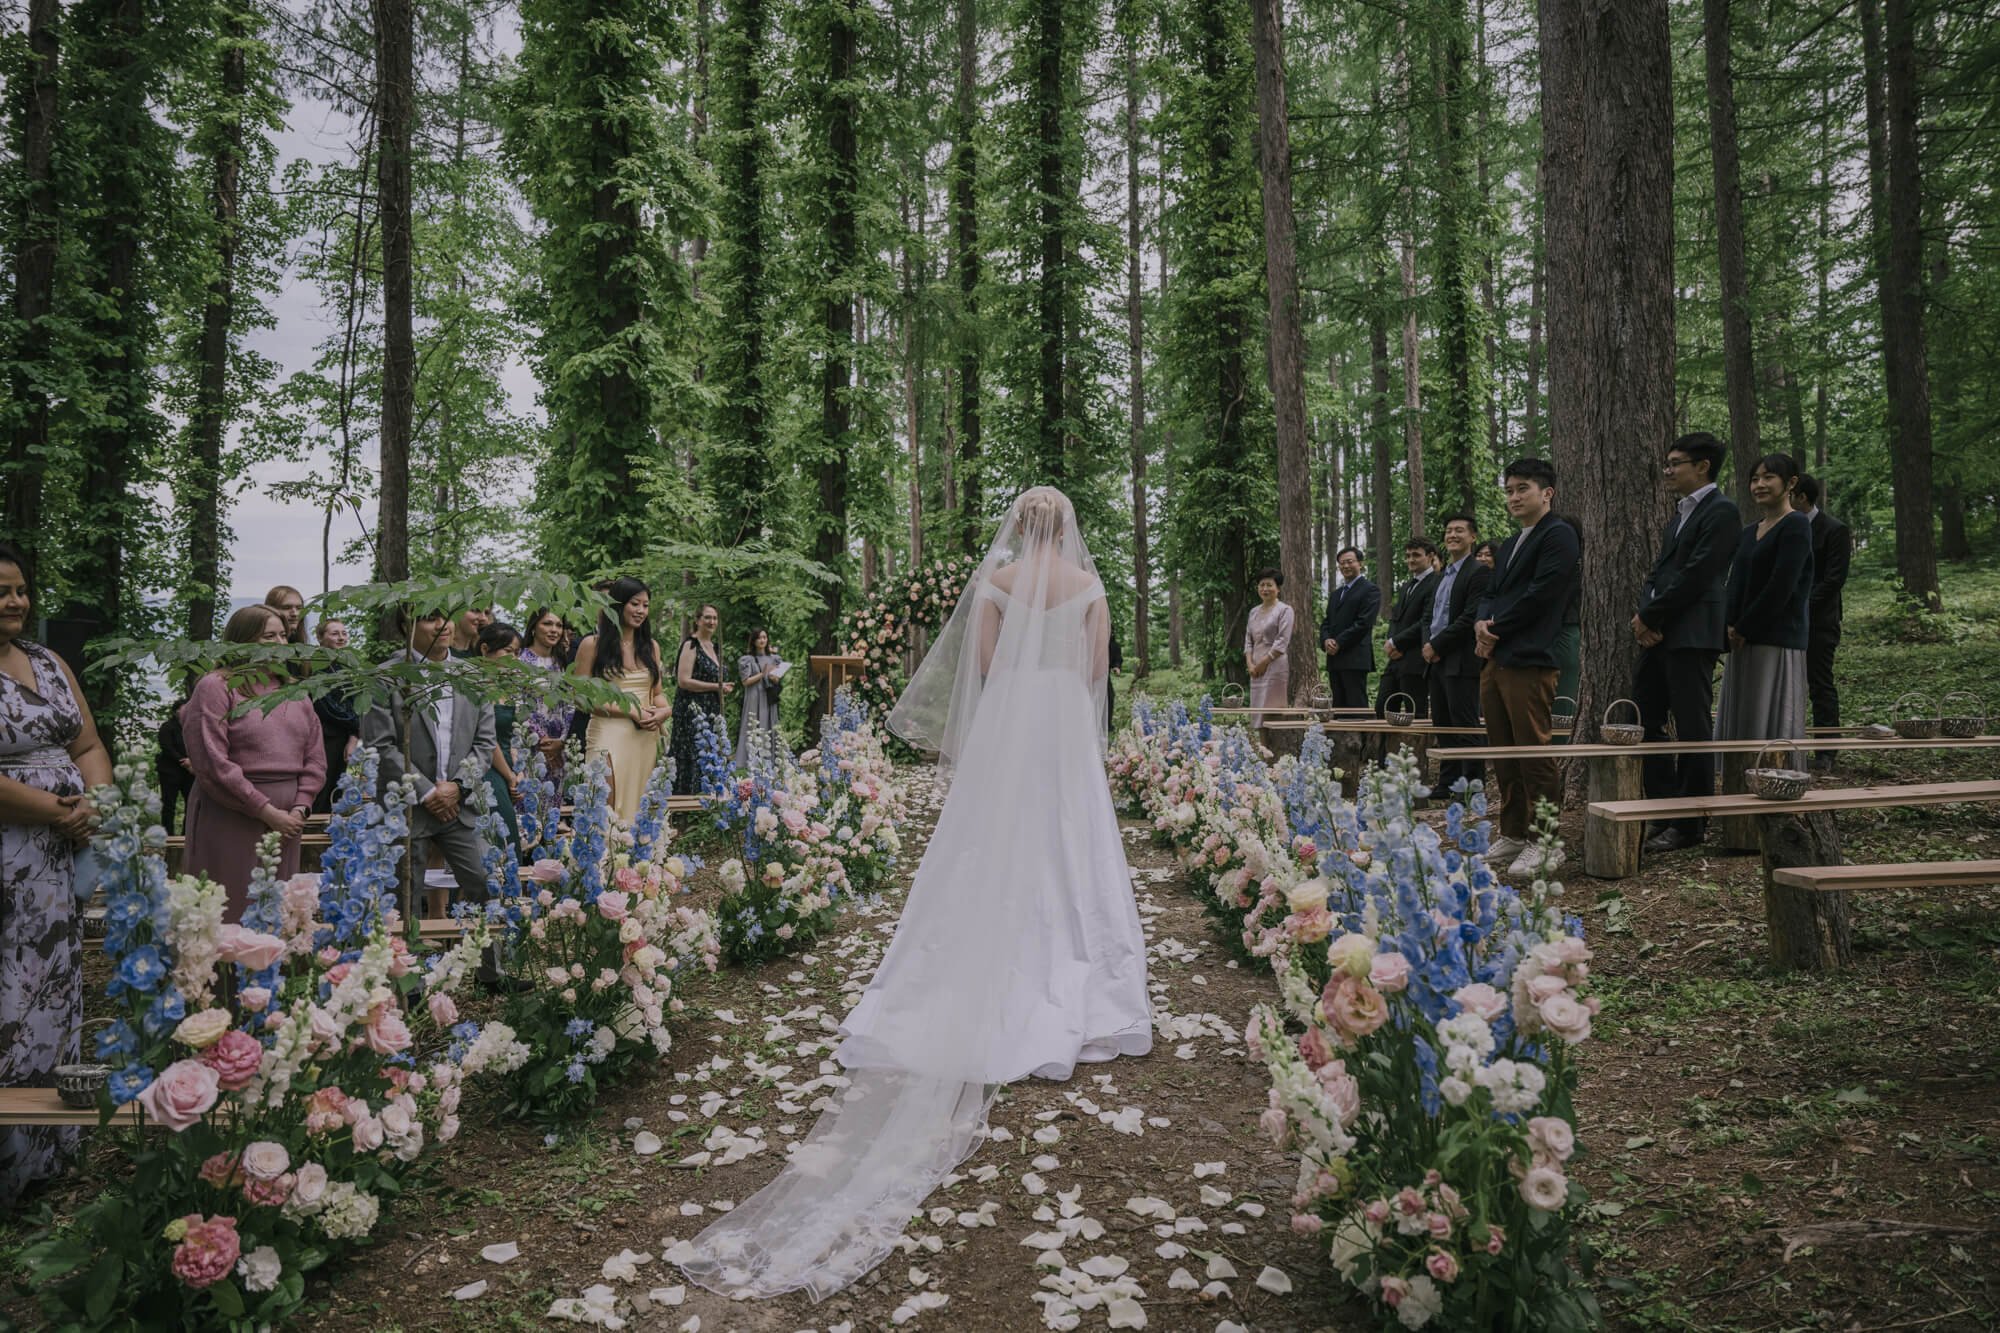 Bride in long embroidered veil walking down aisle